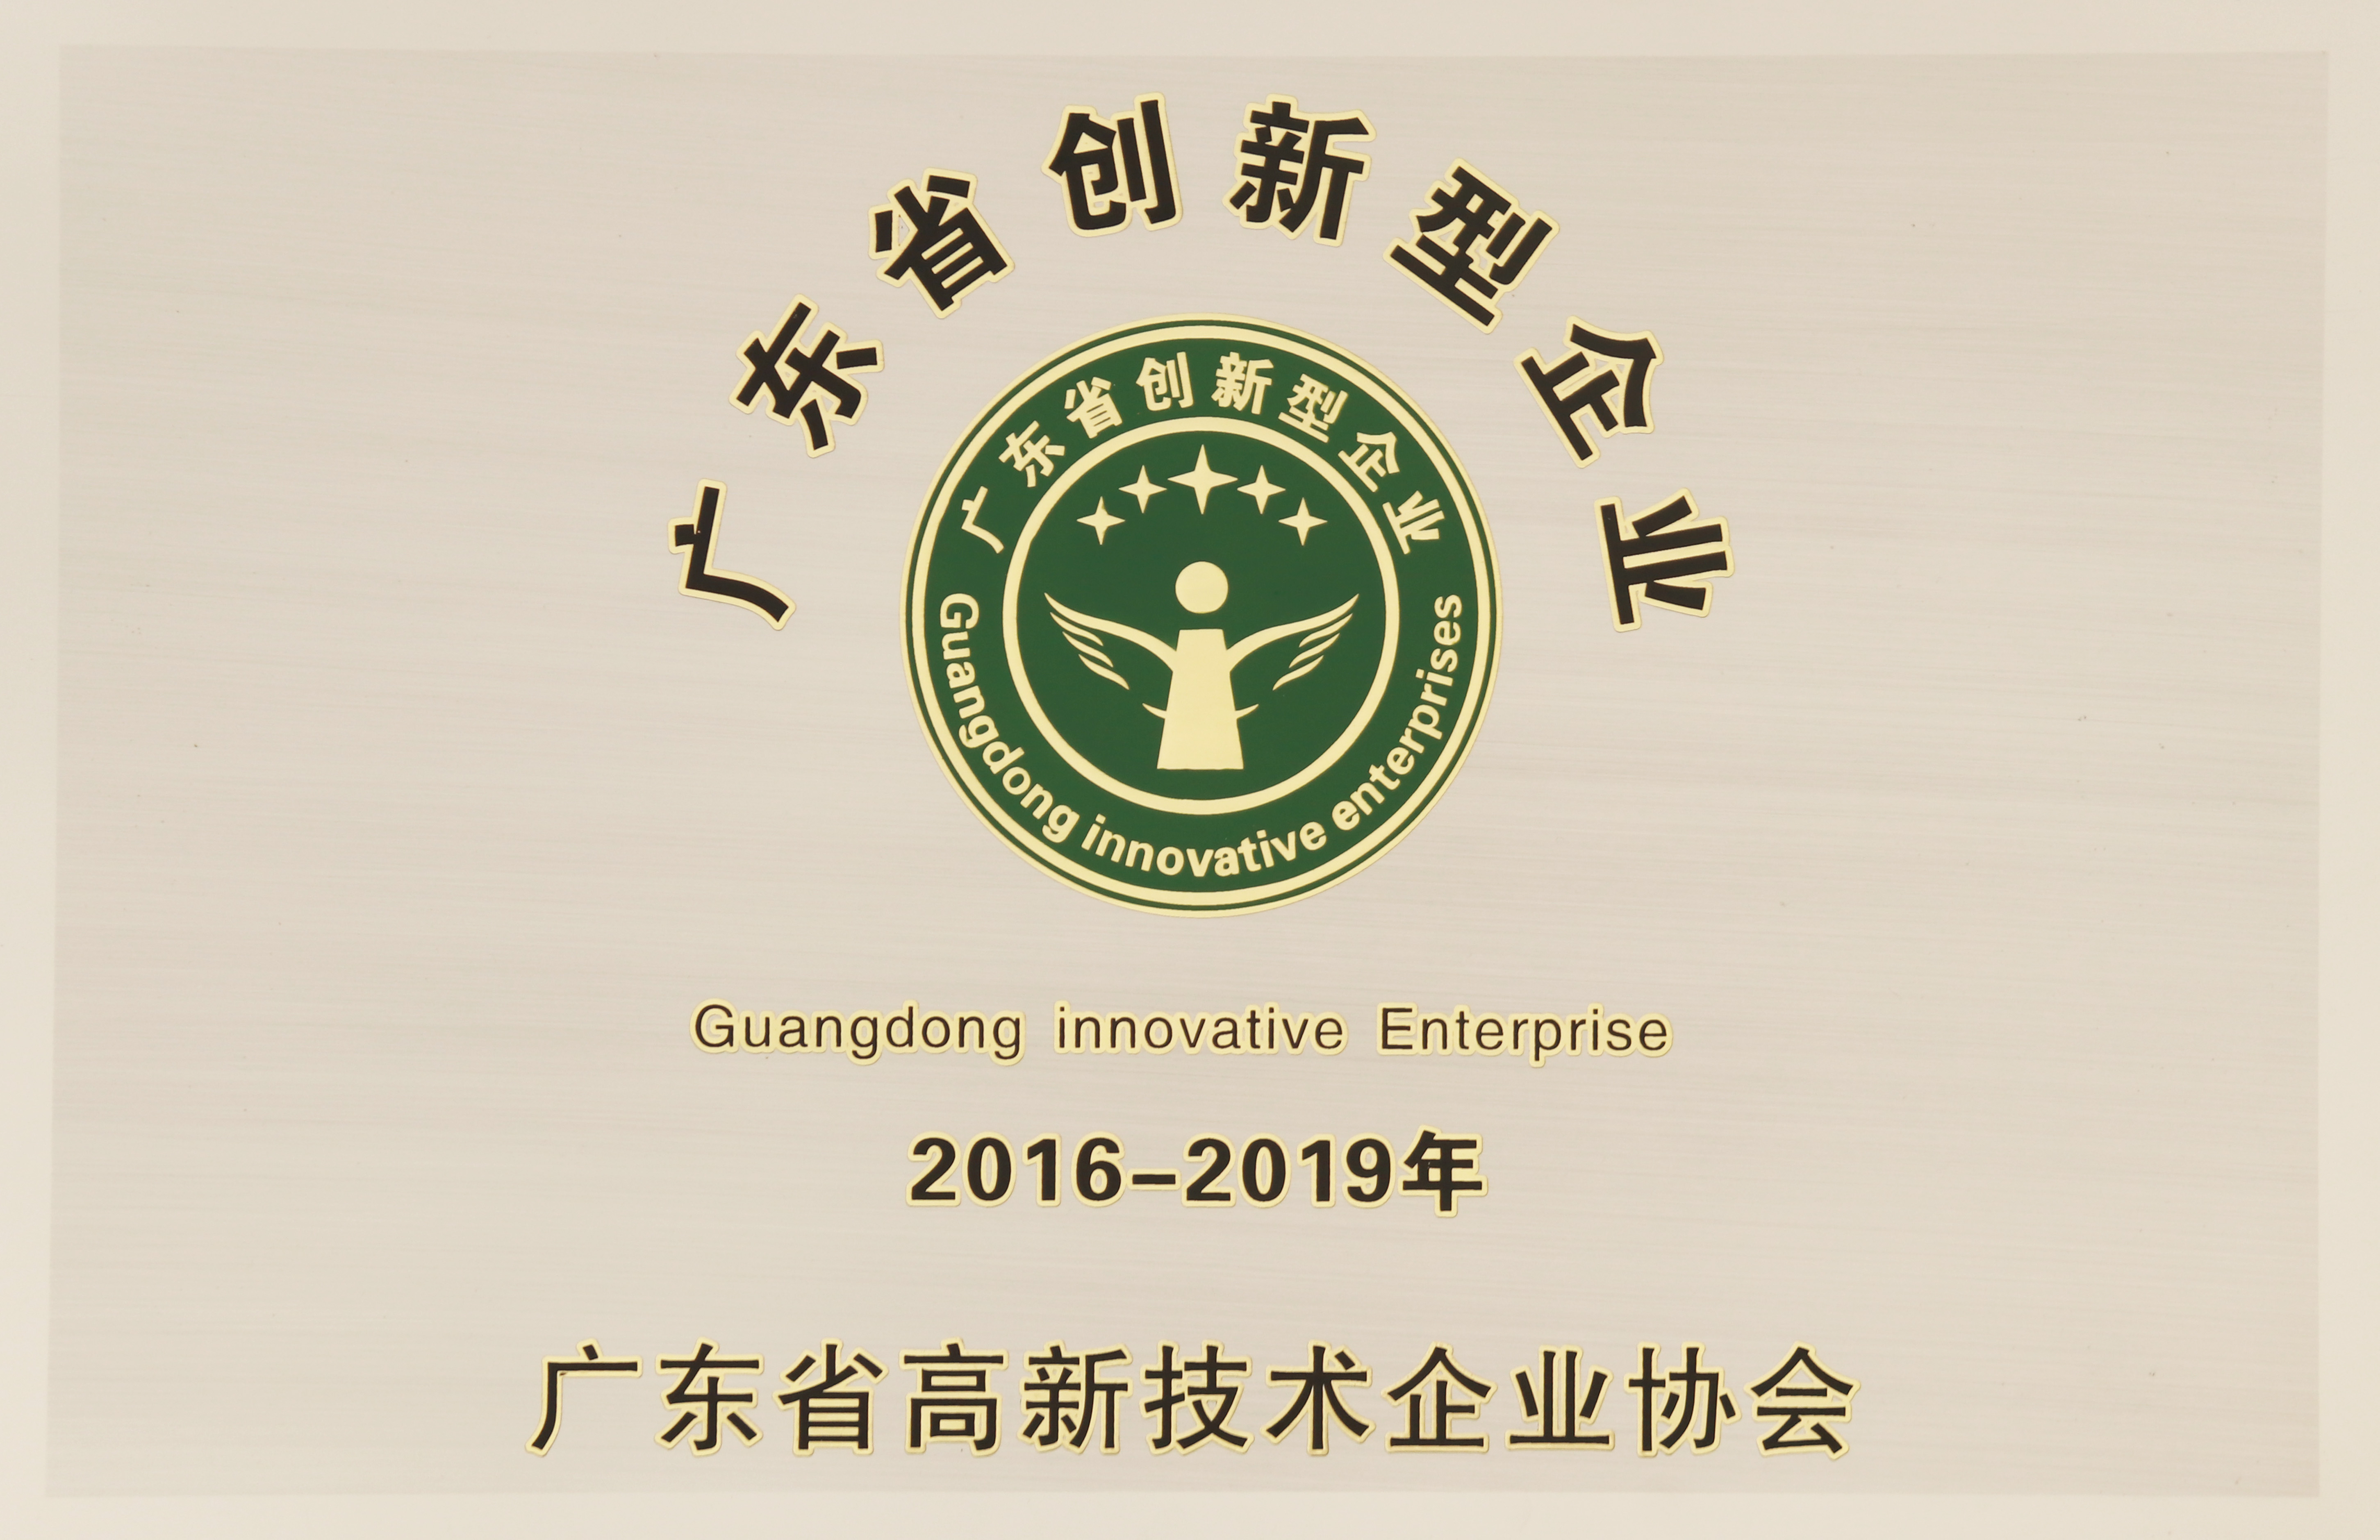 Innovative enterprises in Guangdong Province